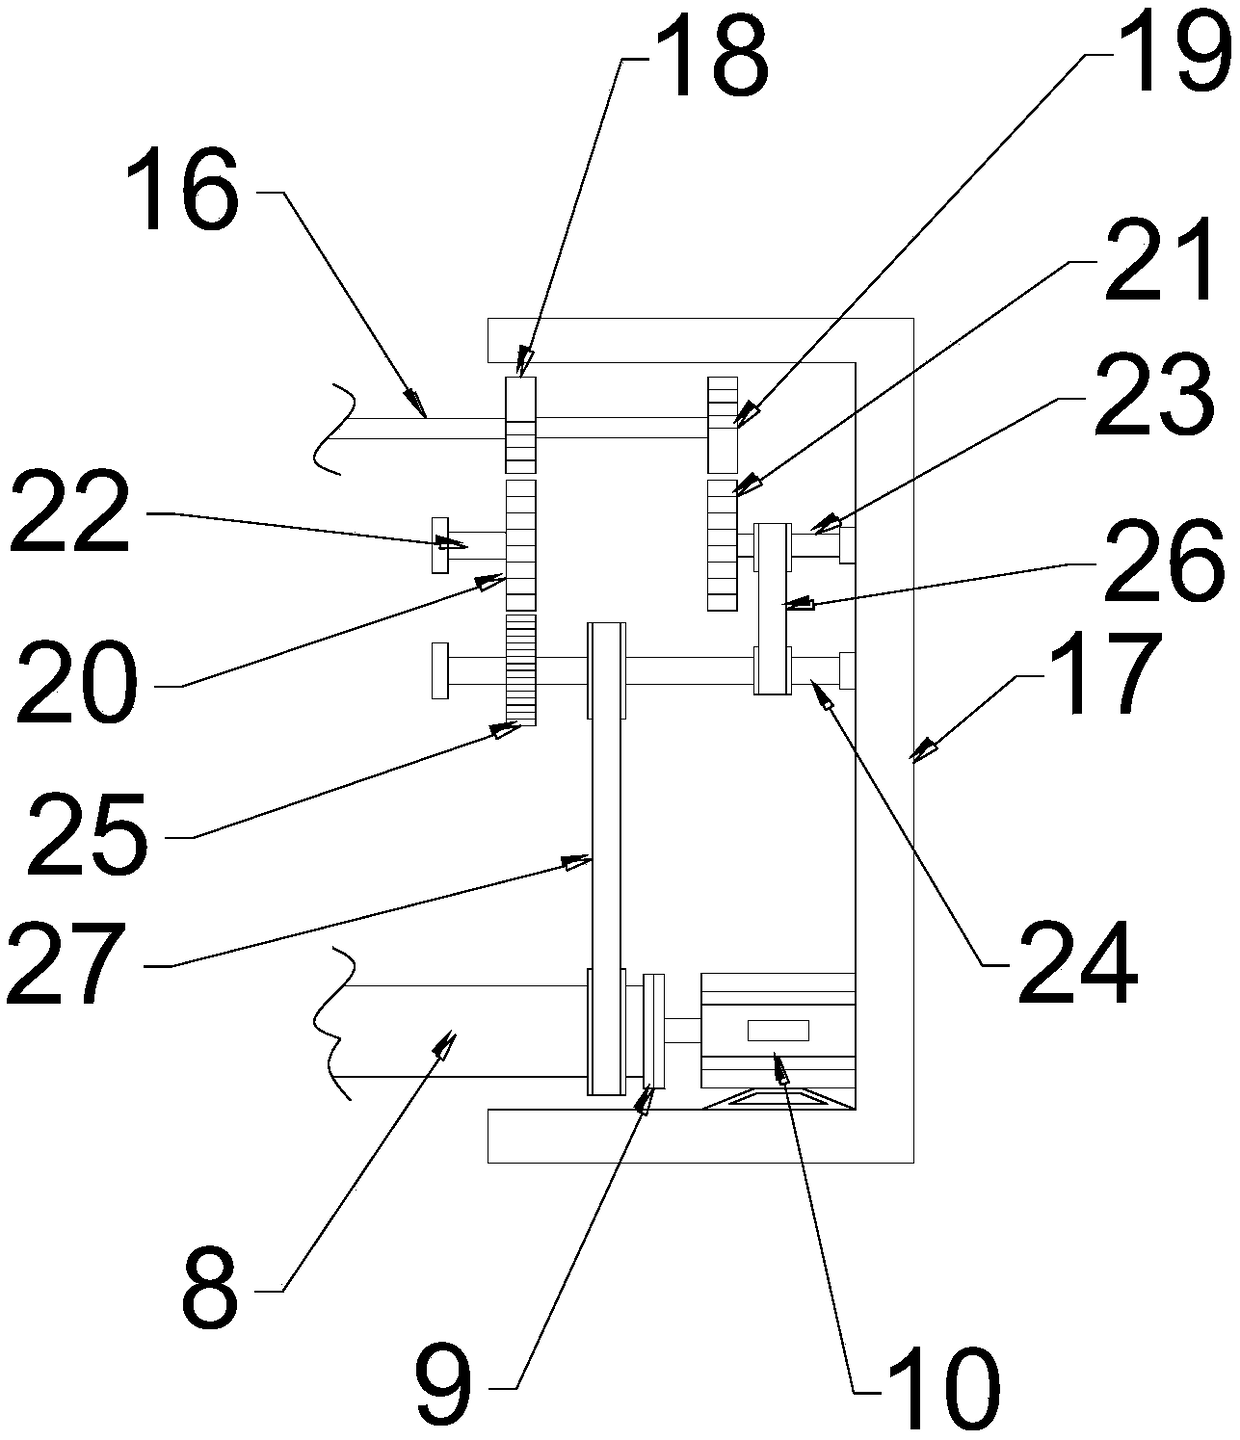 Optical fiber hoisting and laying device